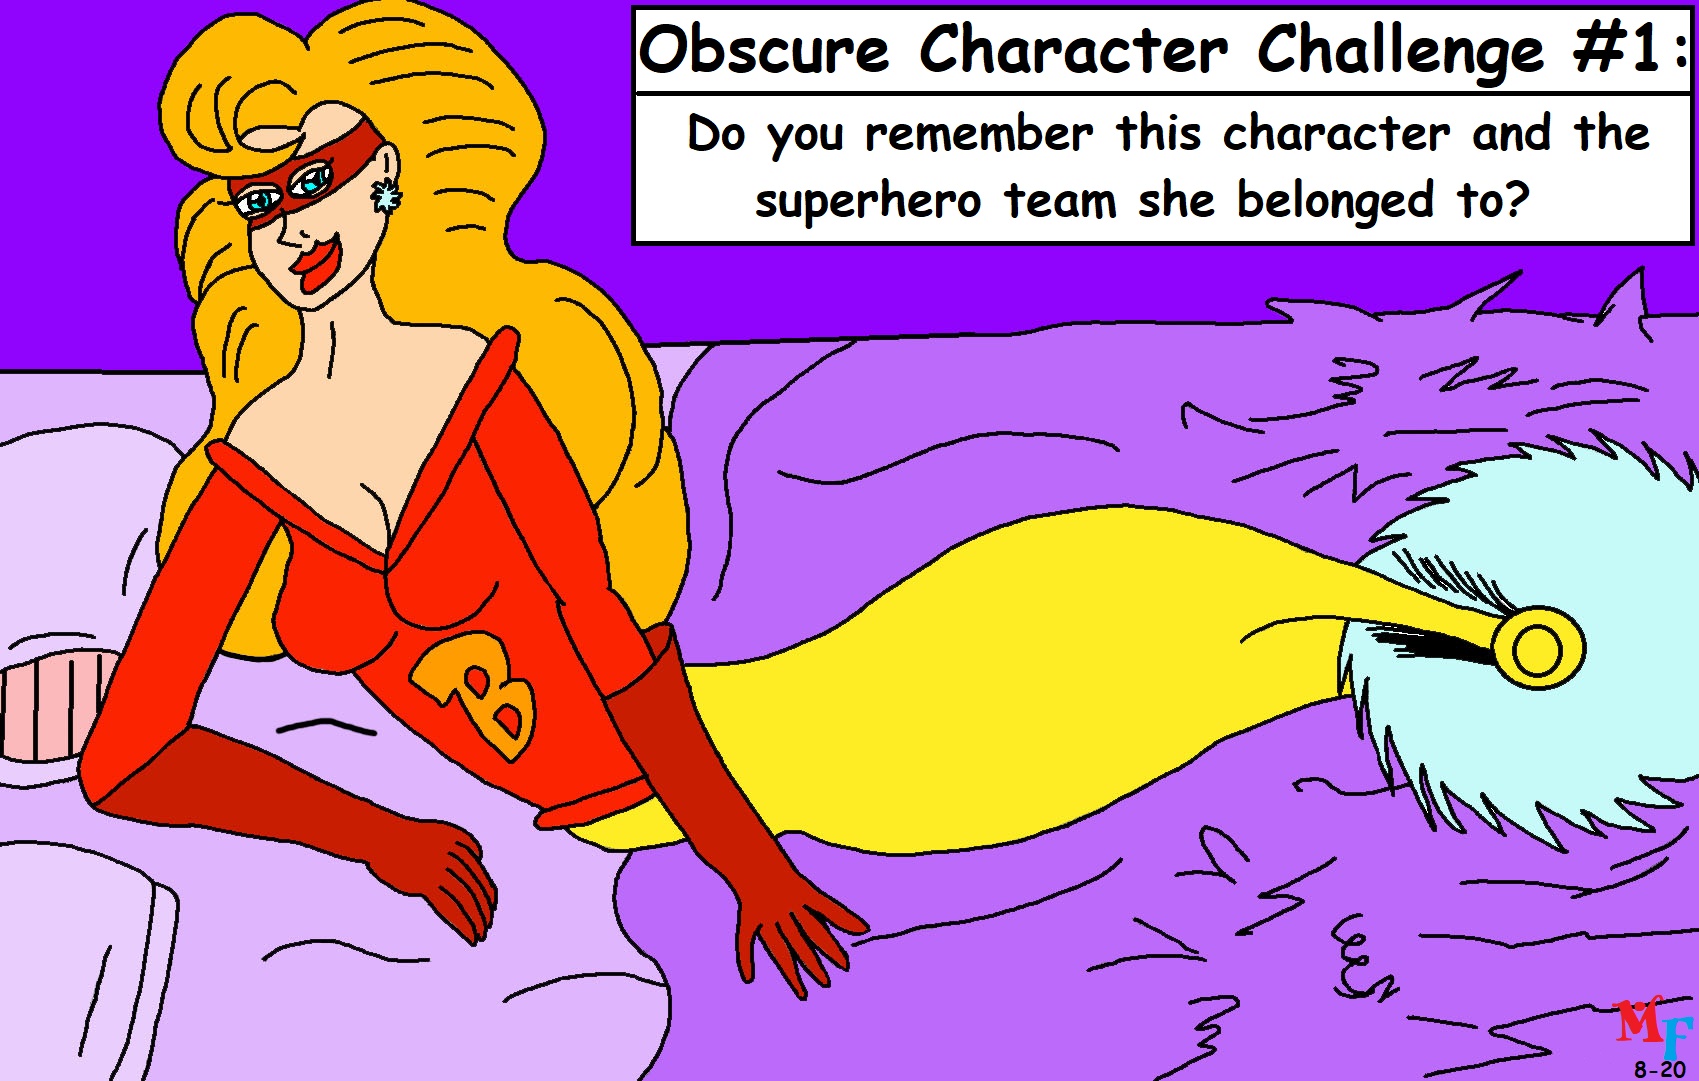 Obscure Character Challenge #1